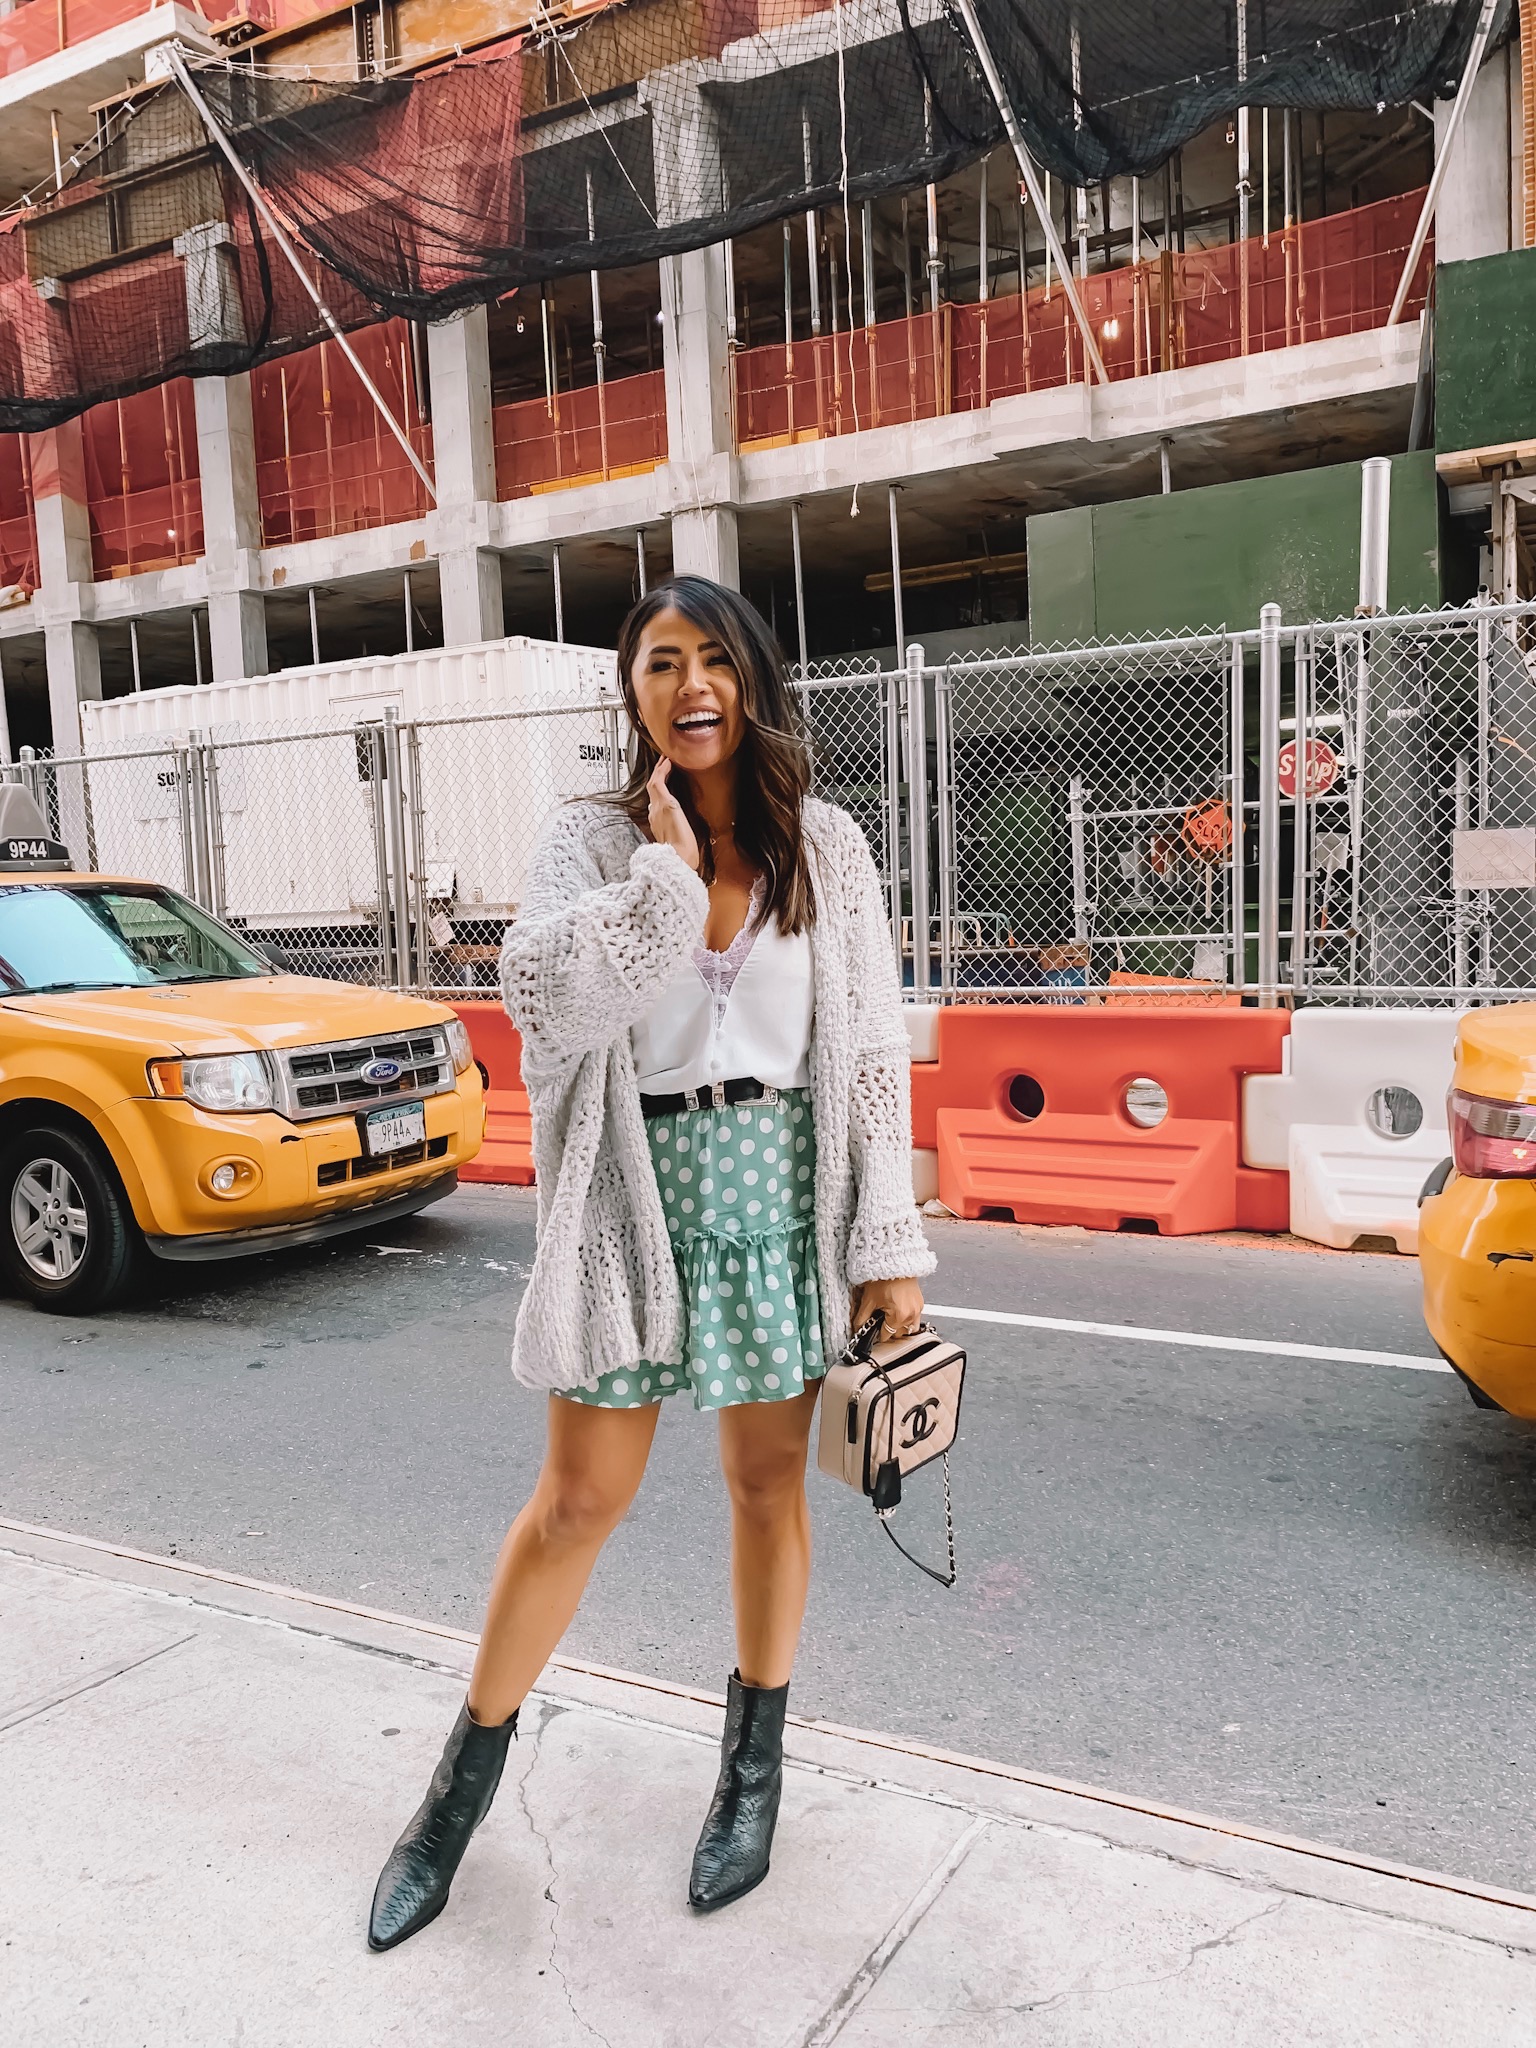 Things to Do in NYC - Outfits - Gypsy Tan -4